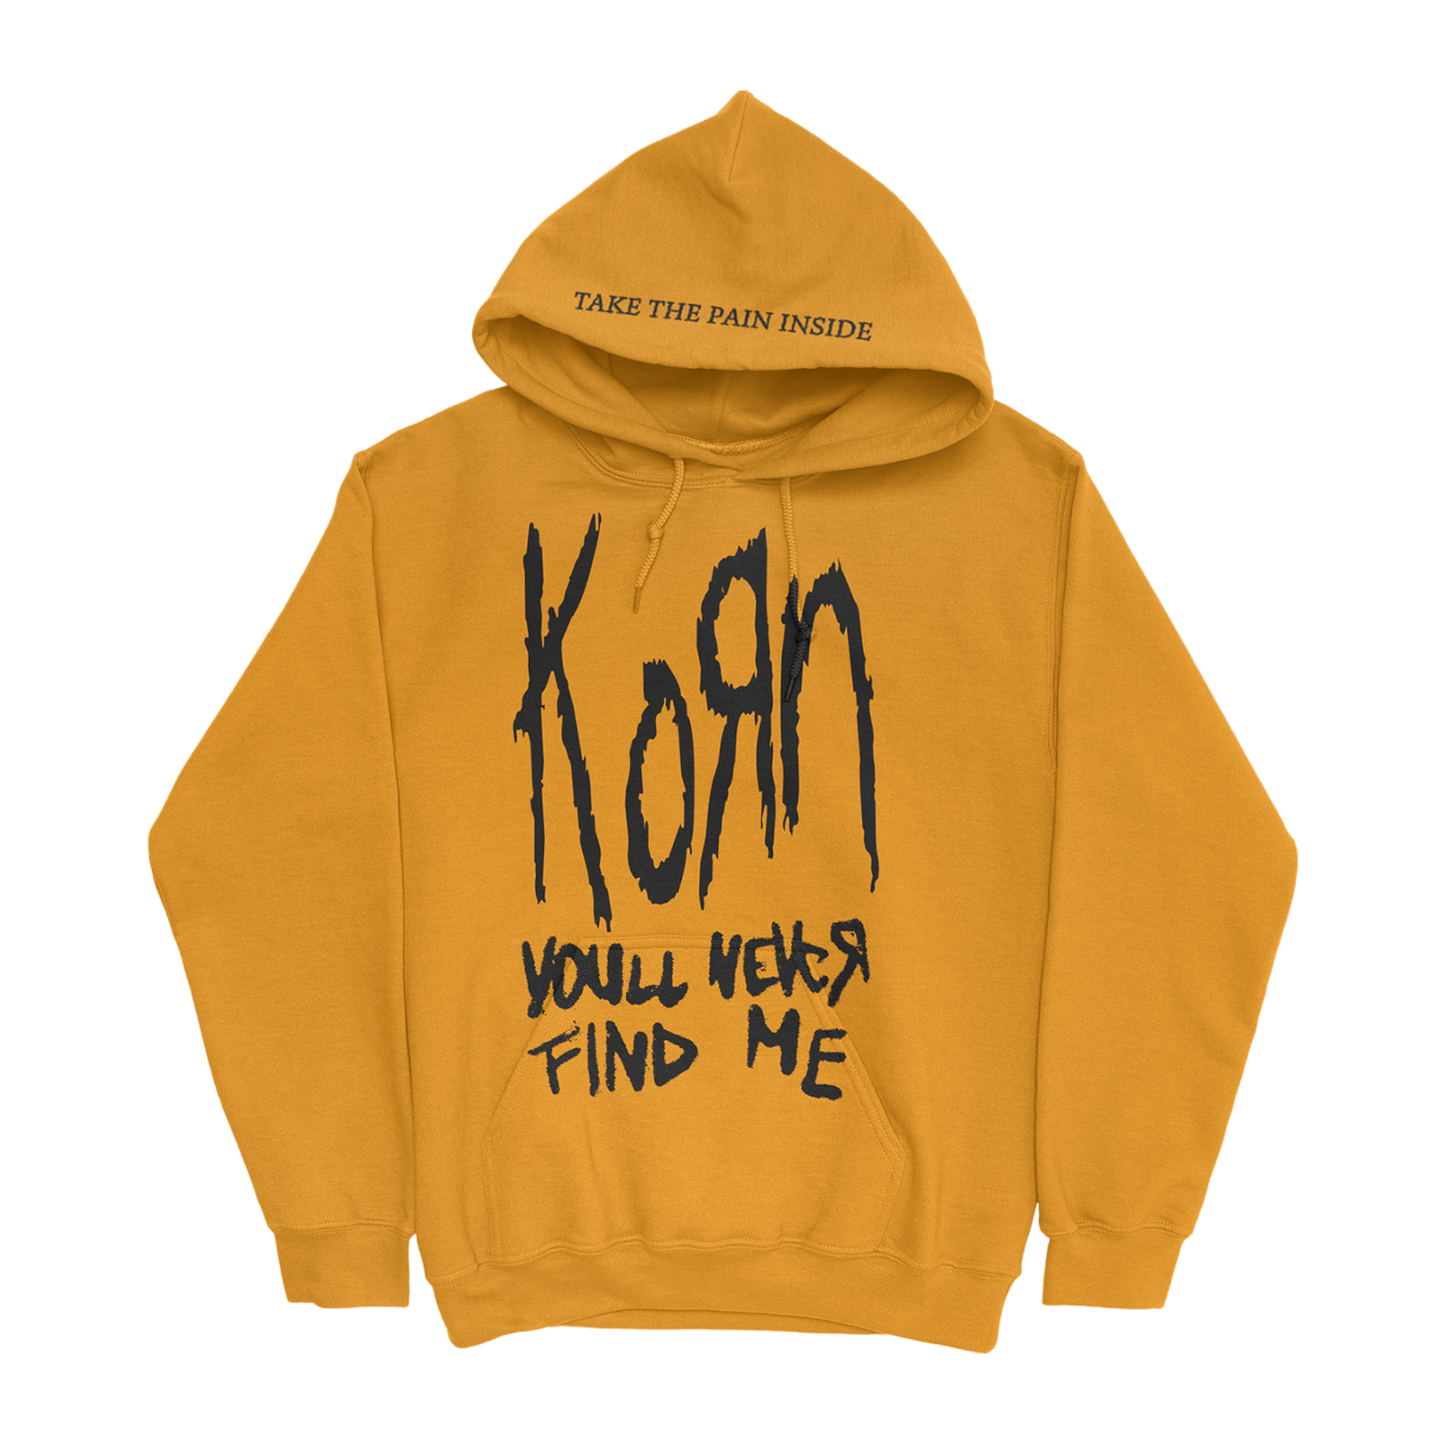 Crazy Pullover Hoodie